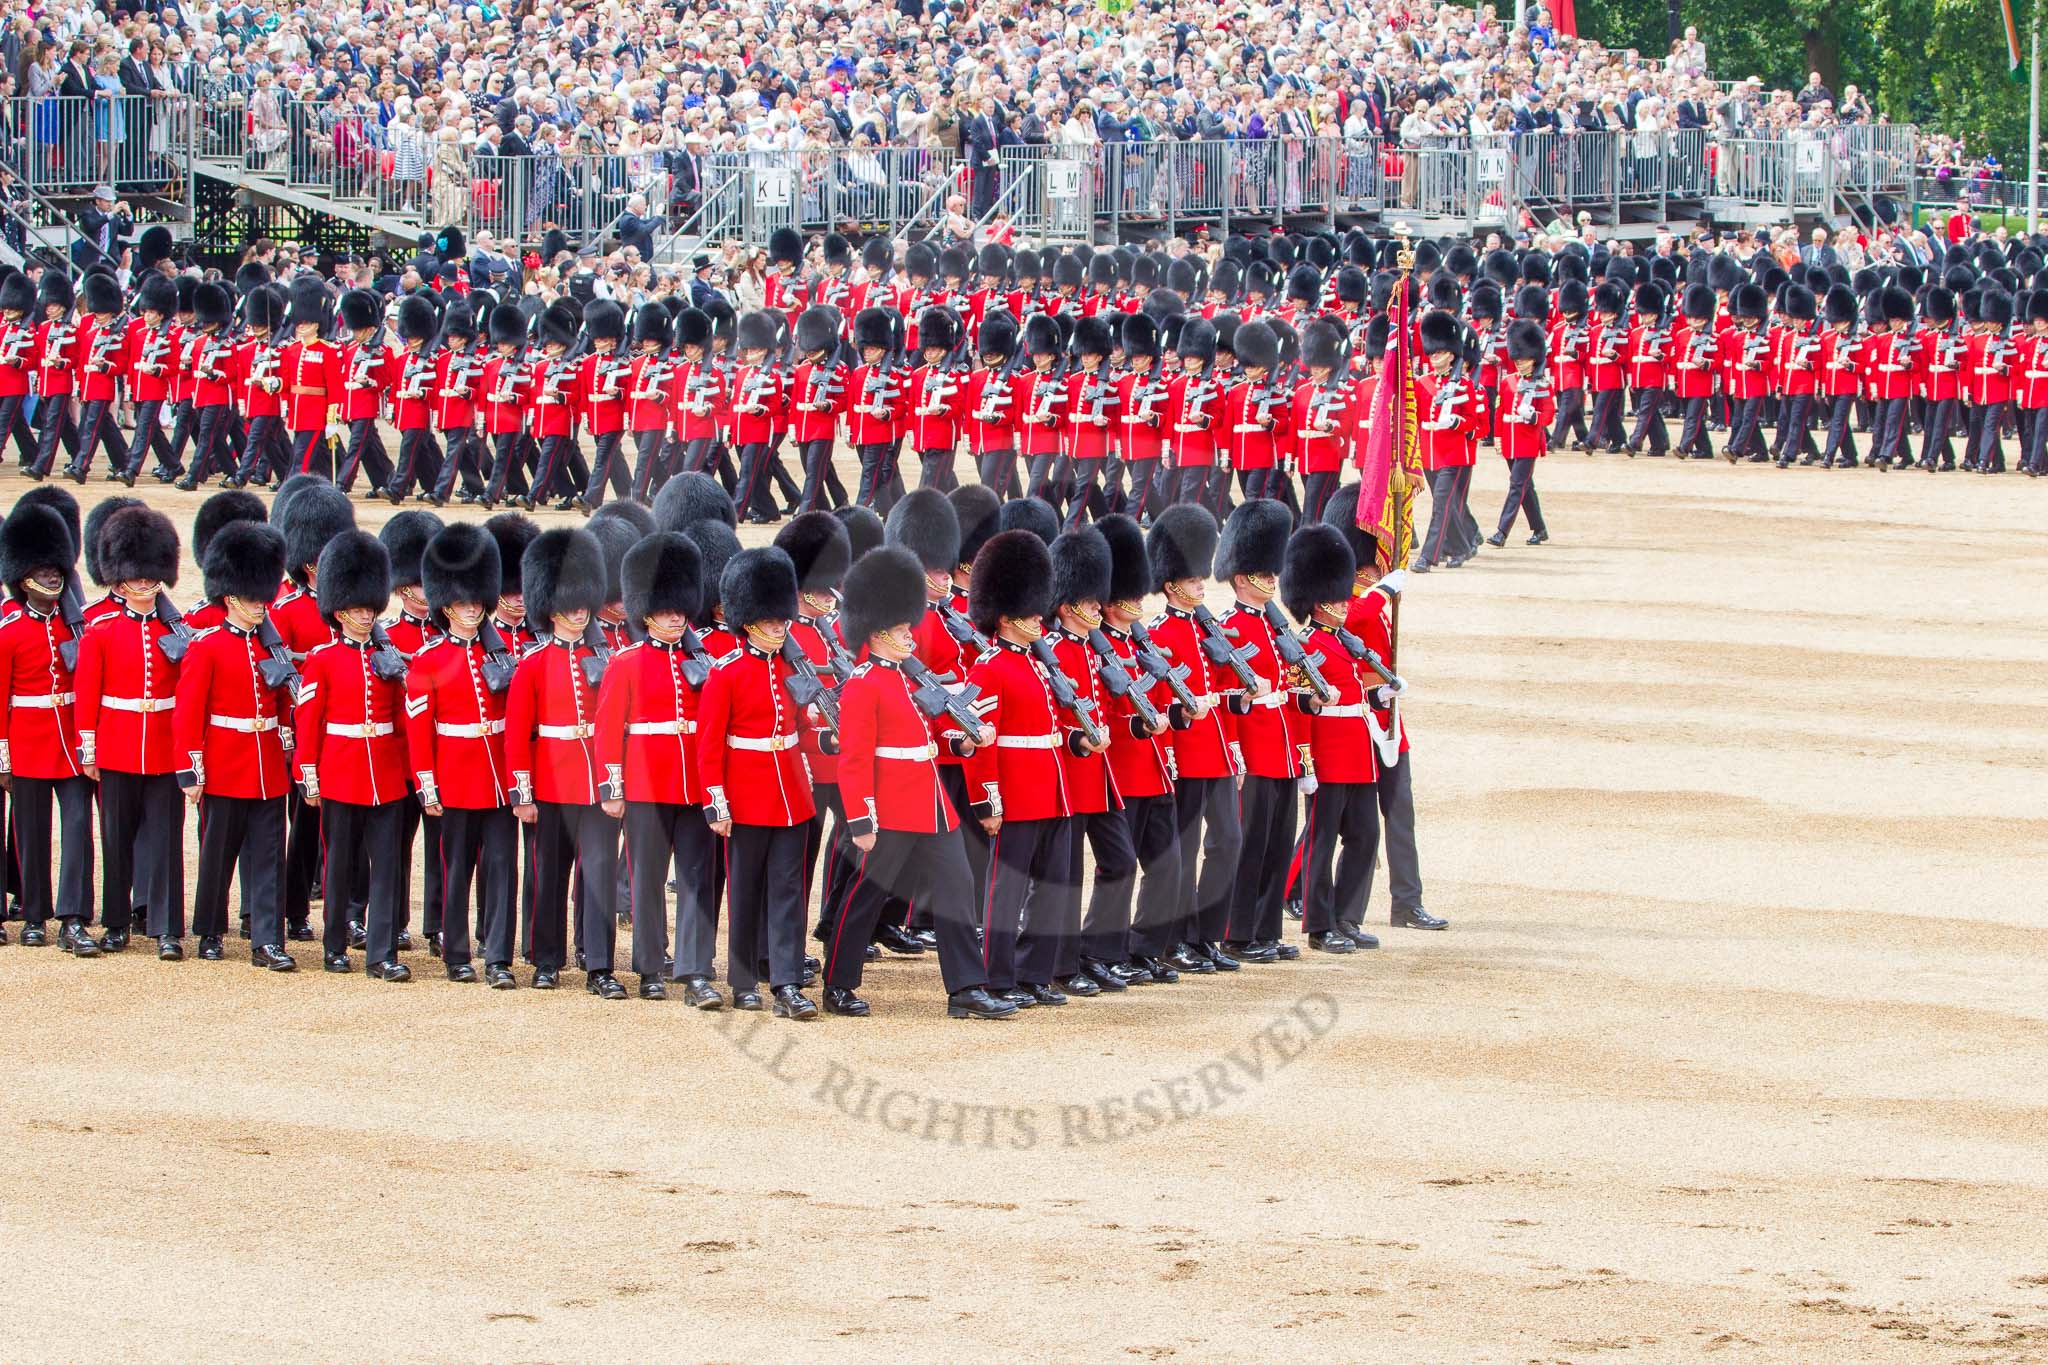 Trooping the Colour 2014.
Horse Guards Parade, Westminster,
London SW1A,

United Kingdom,
on 14 June 2014 at 11:36, image #614